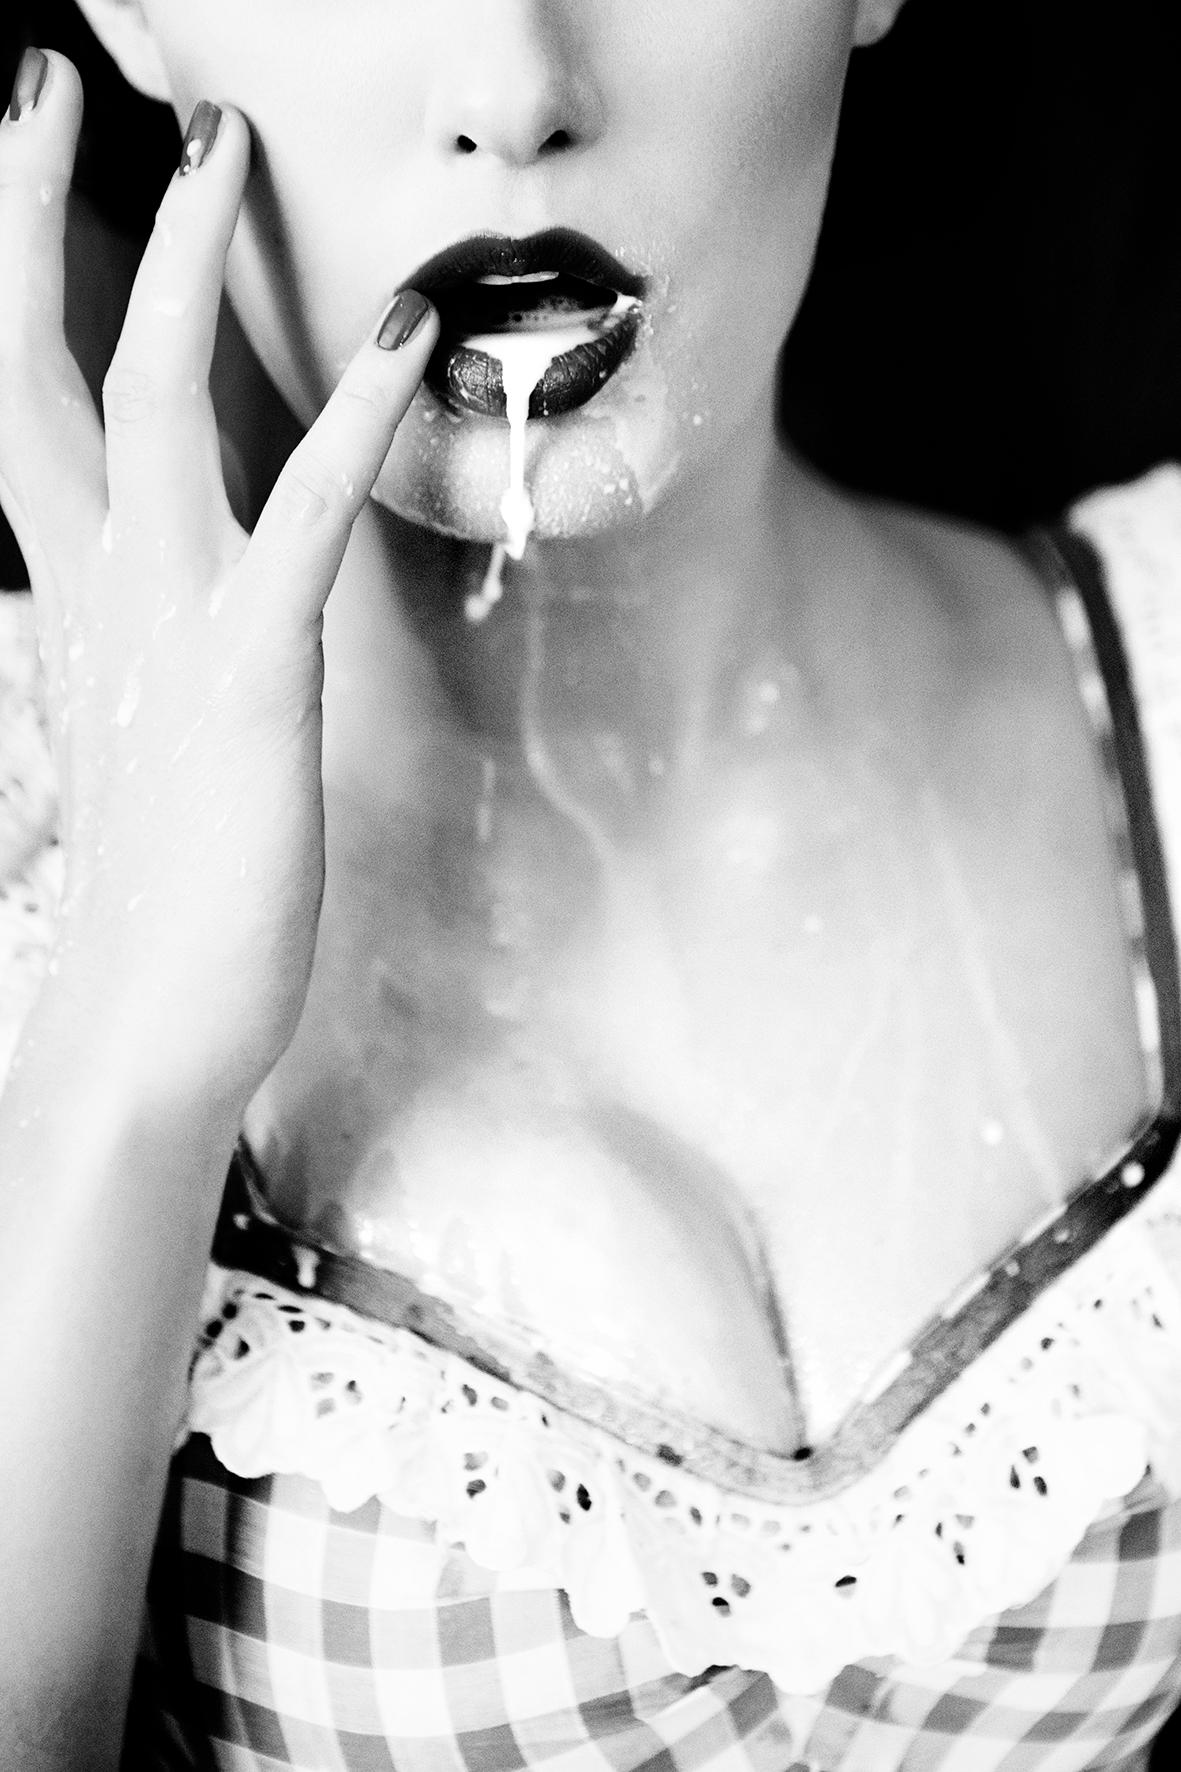 Ellen von Unwerth Black and White Photograph - Thirsty - Milk dripping out of a Model's Mouth, b&w fine art photography, 2015